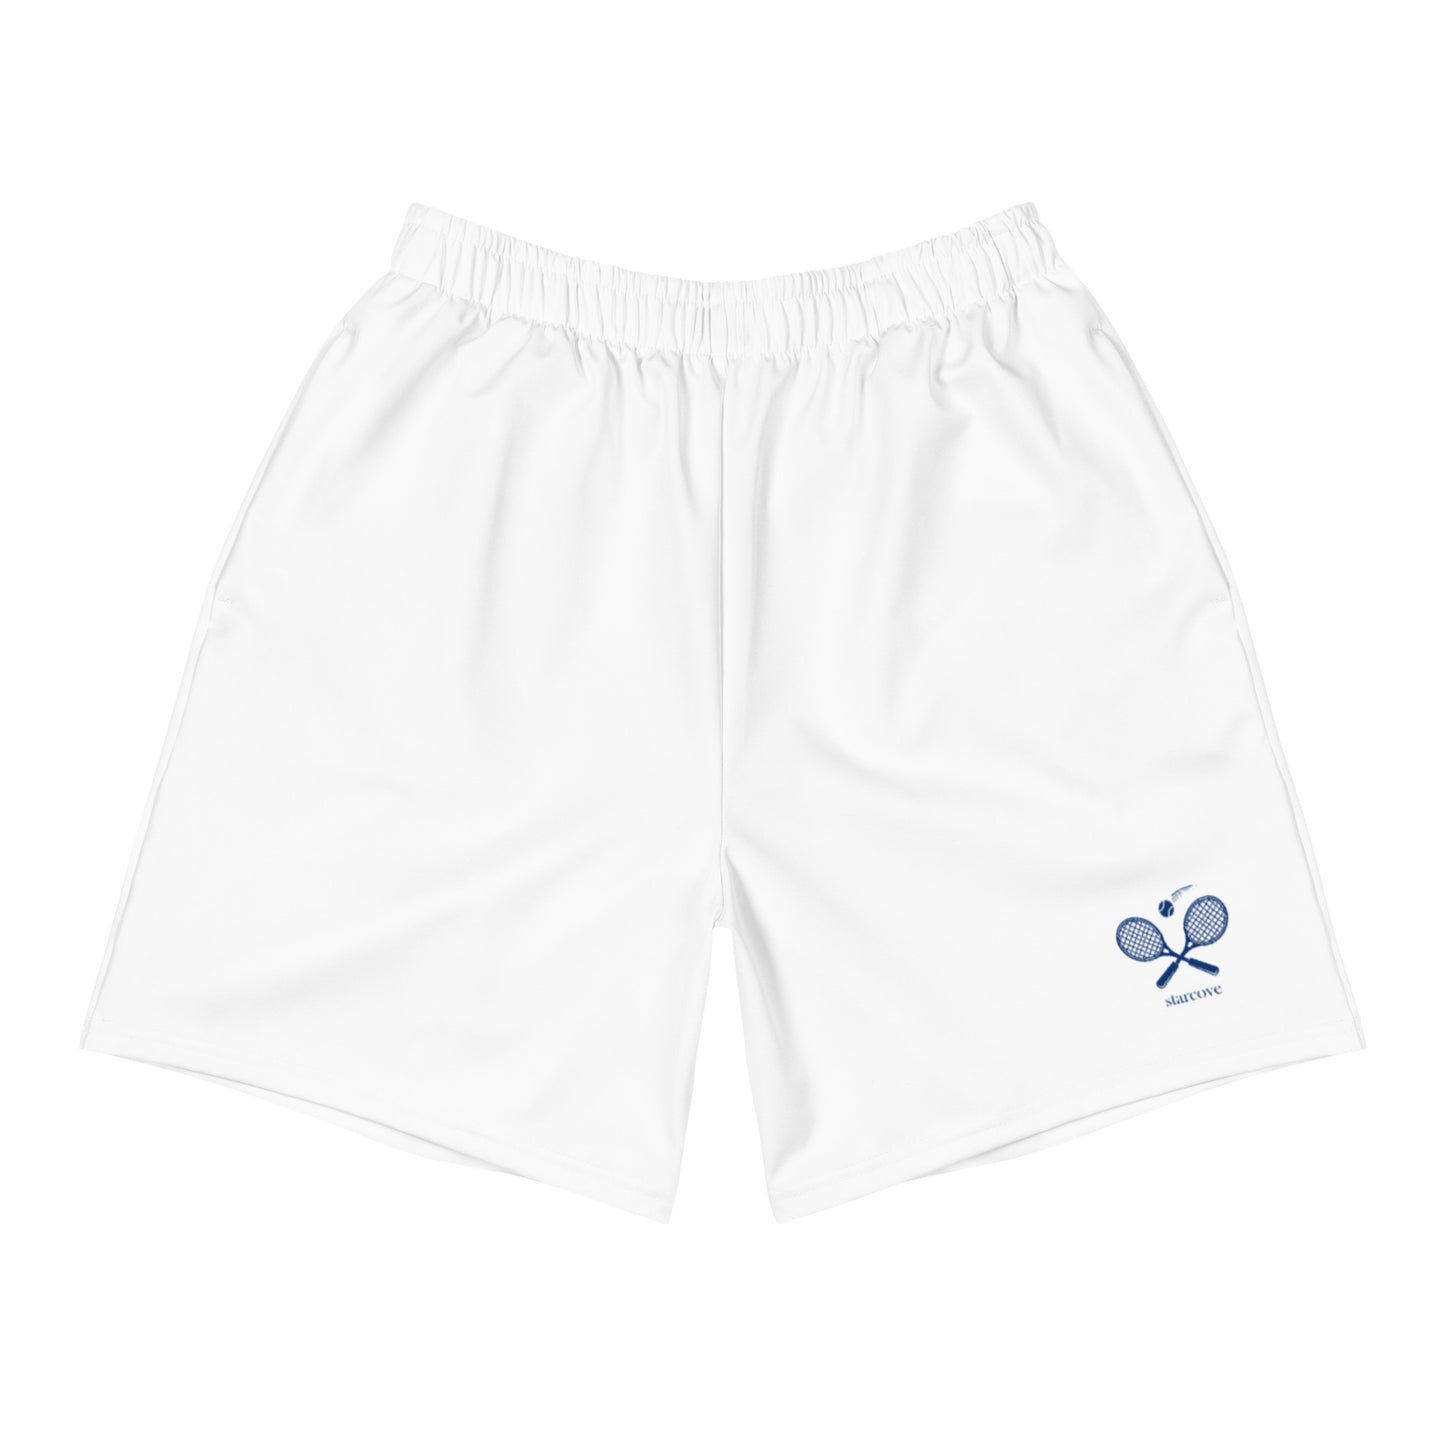 Tennis Men's Athletic 6.5" Long Shorts, Vintage Racket Racquets Sports Player White Retro Beach Shorts with Pockets Outfit Gift